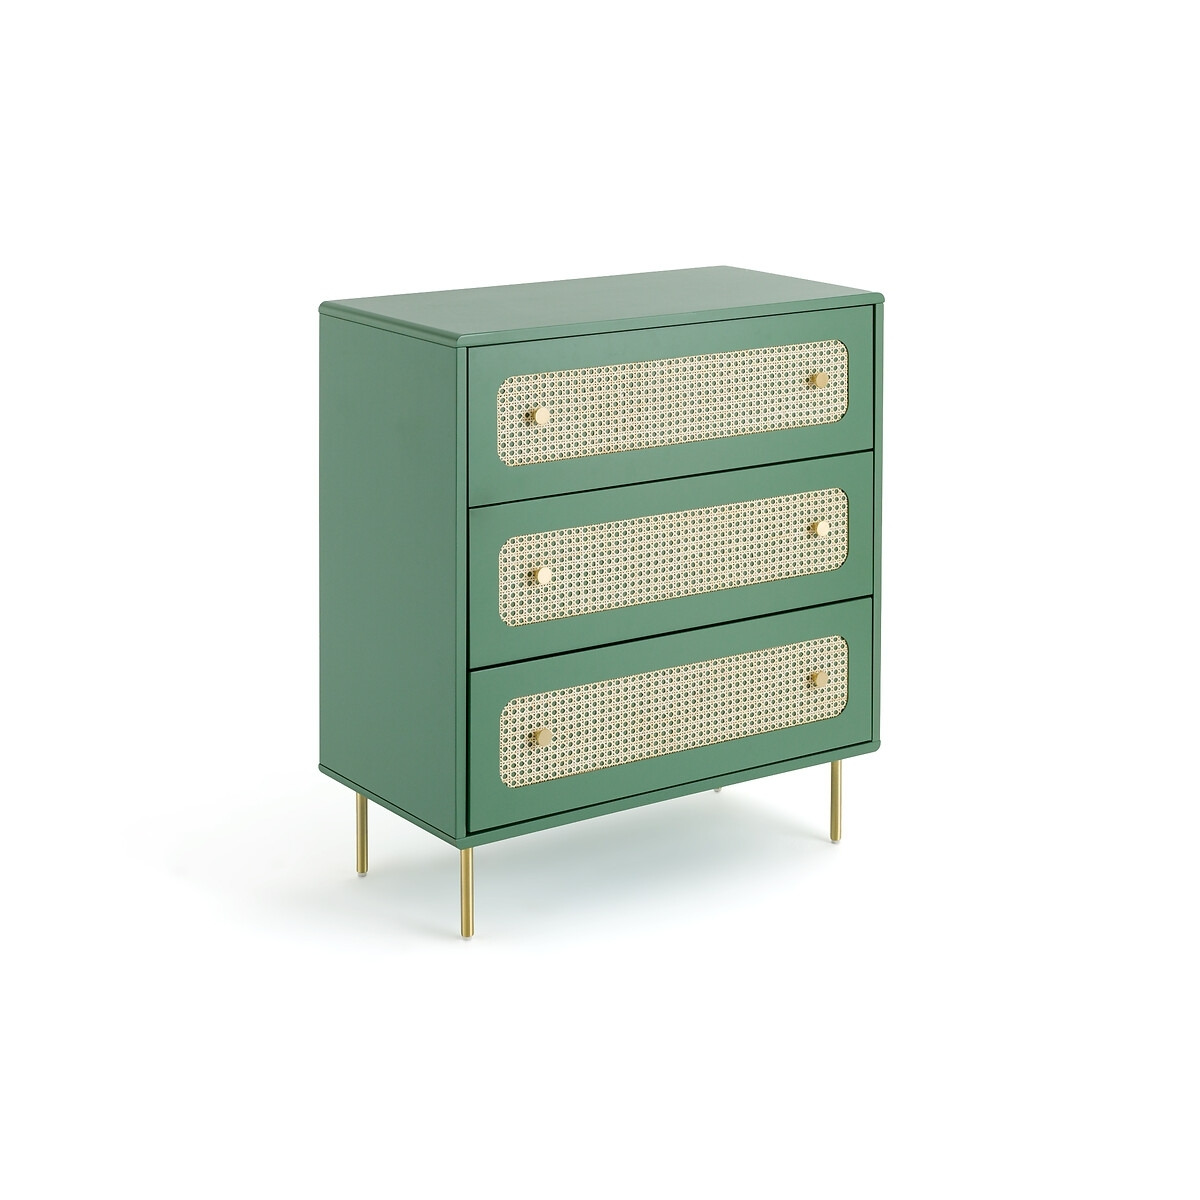 Redpop Child's Chest of Drawers - image 1